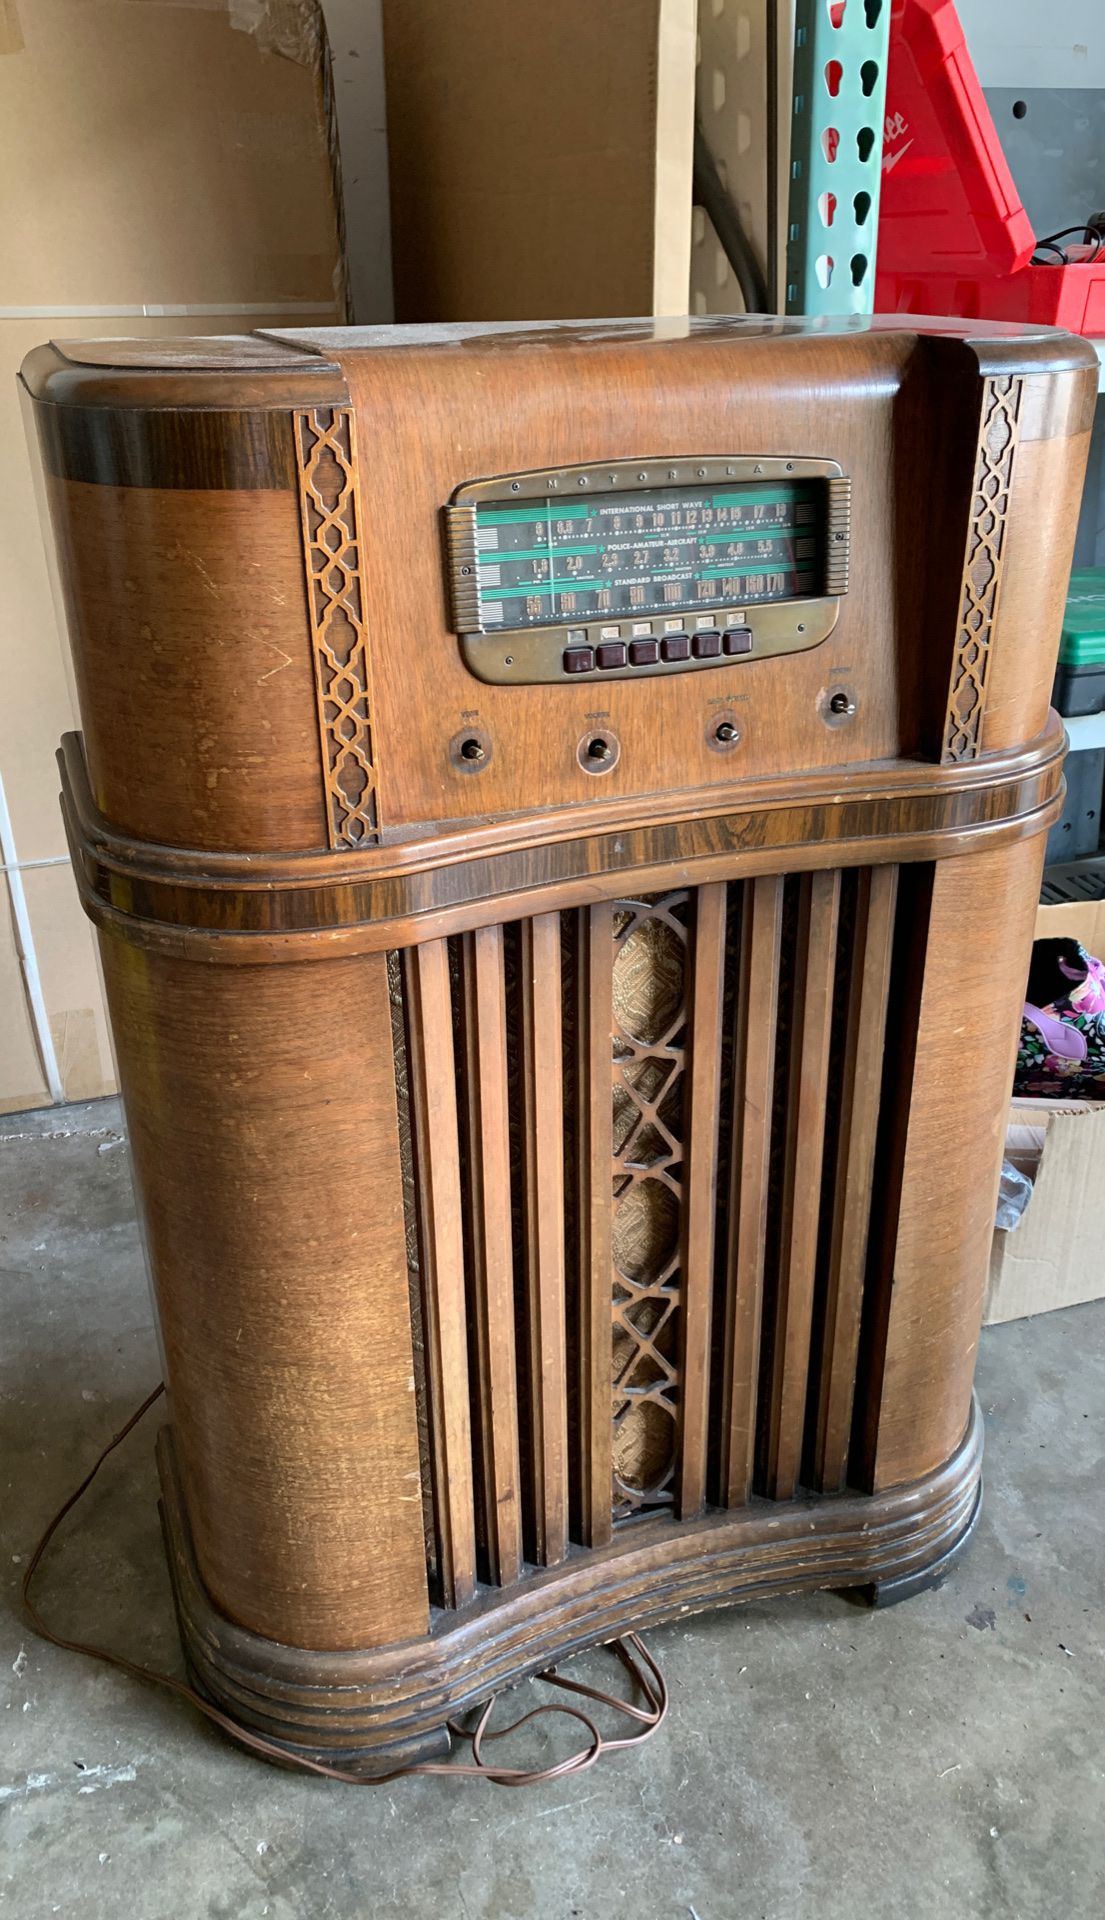 Antique Radio! Awesome statement piece for any man cave or Gameroom!!